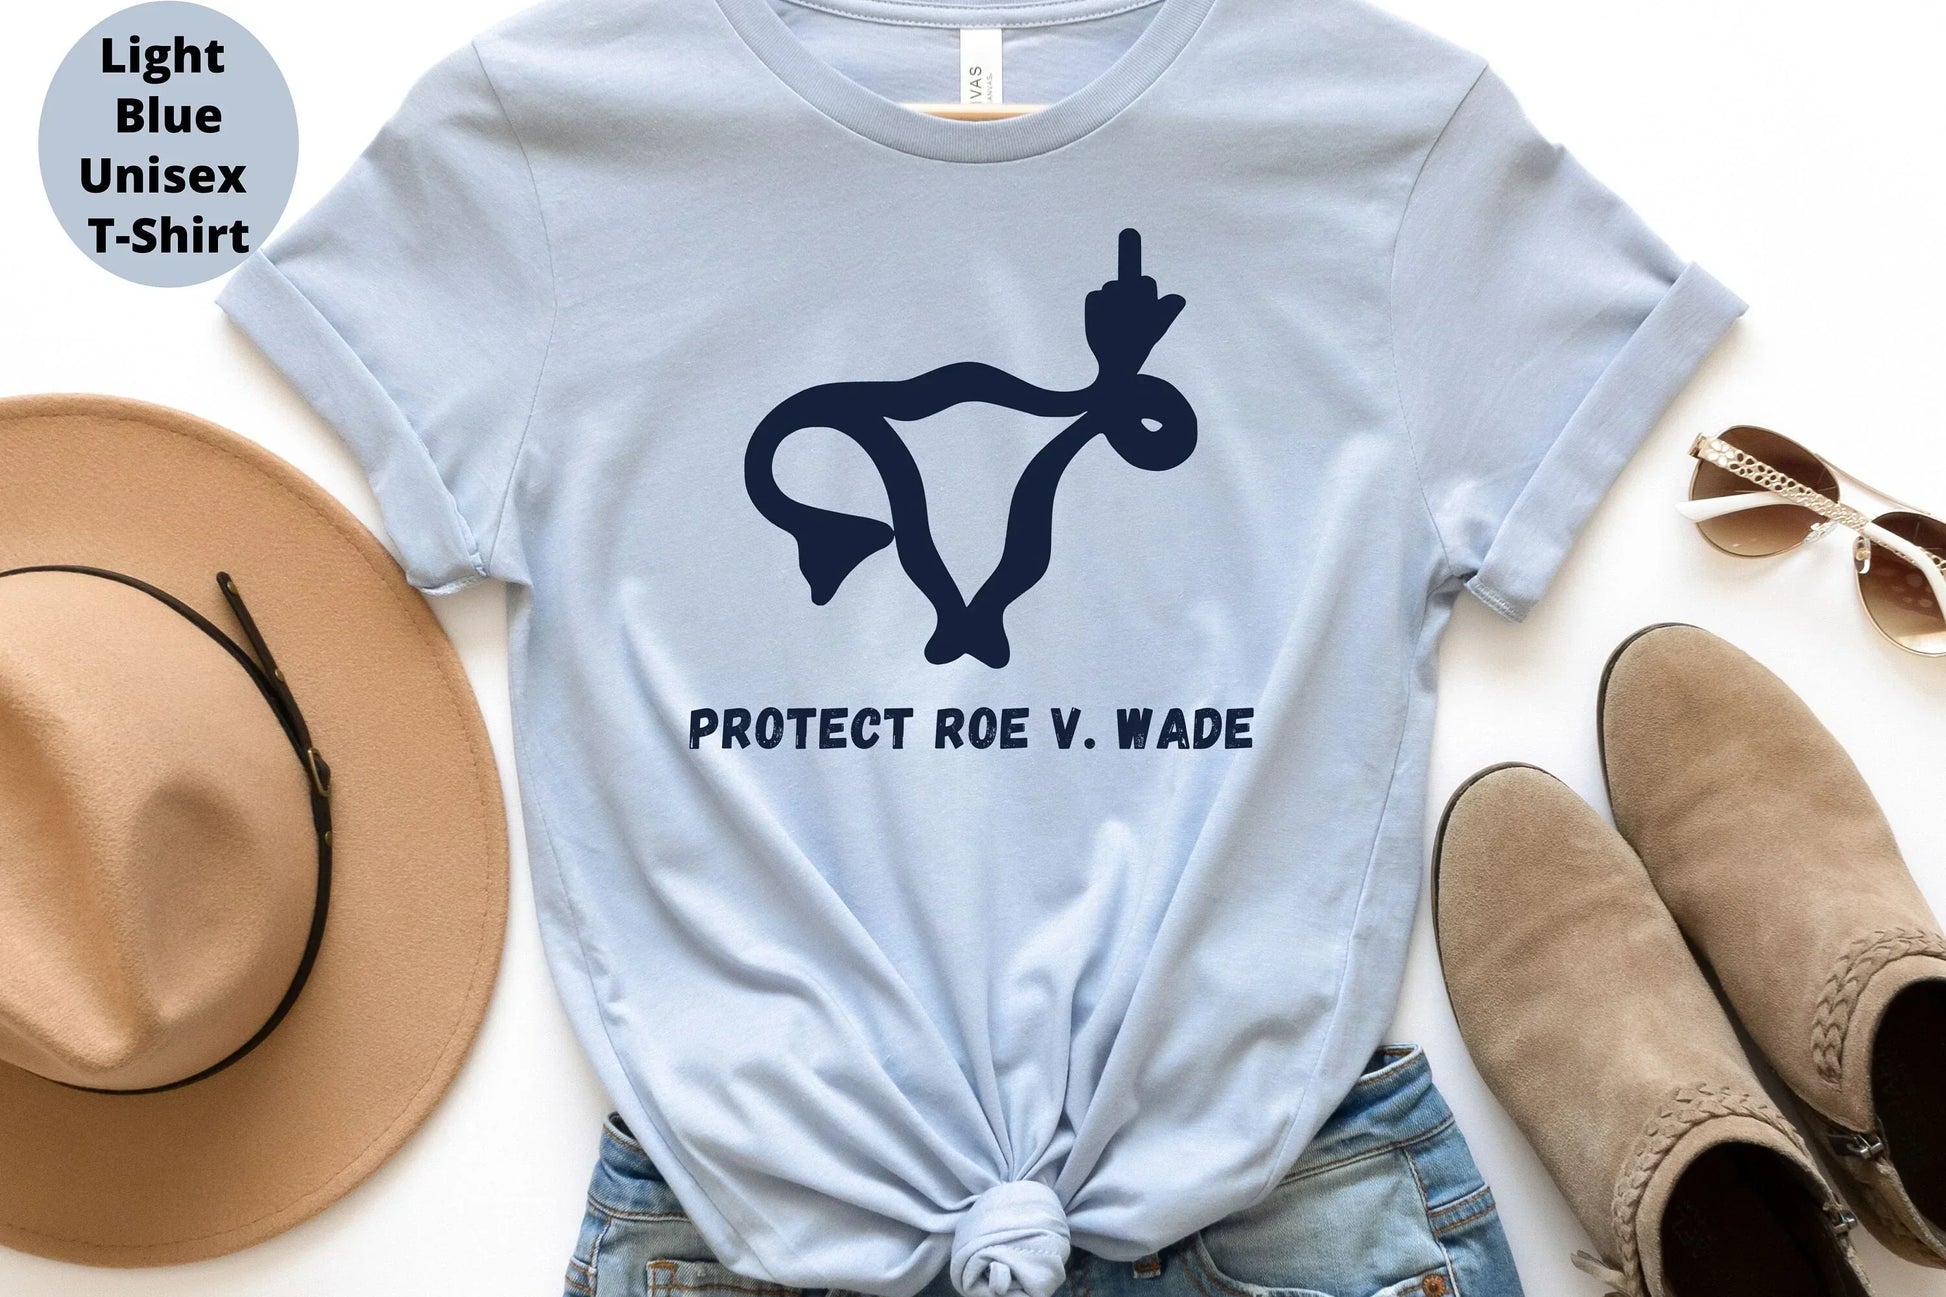 Protect Roe v Wade, My body My Choice T-shirt, Protest, Uterus Women Rights, Pro Choice Shirt, Activist, Equality Sweatshirt,Feminist Hoodie